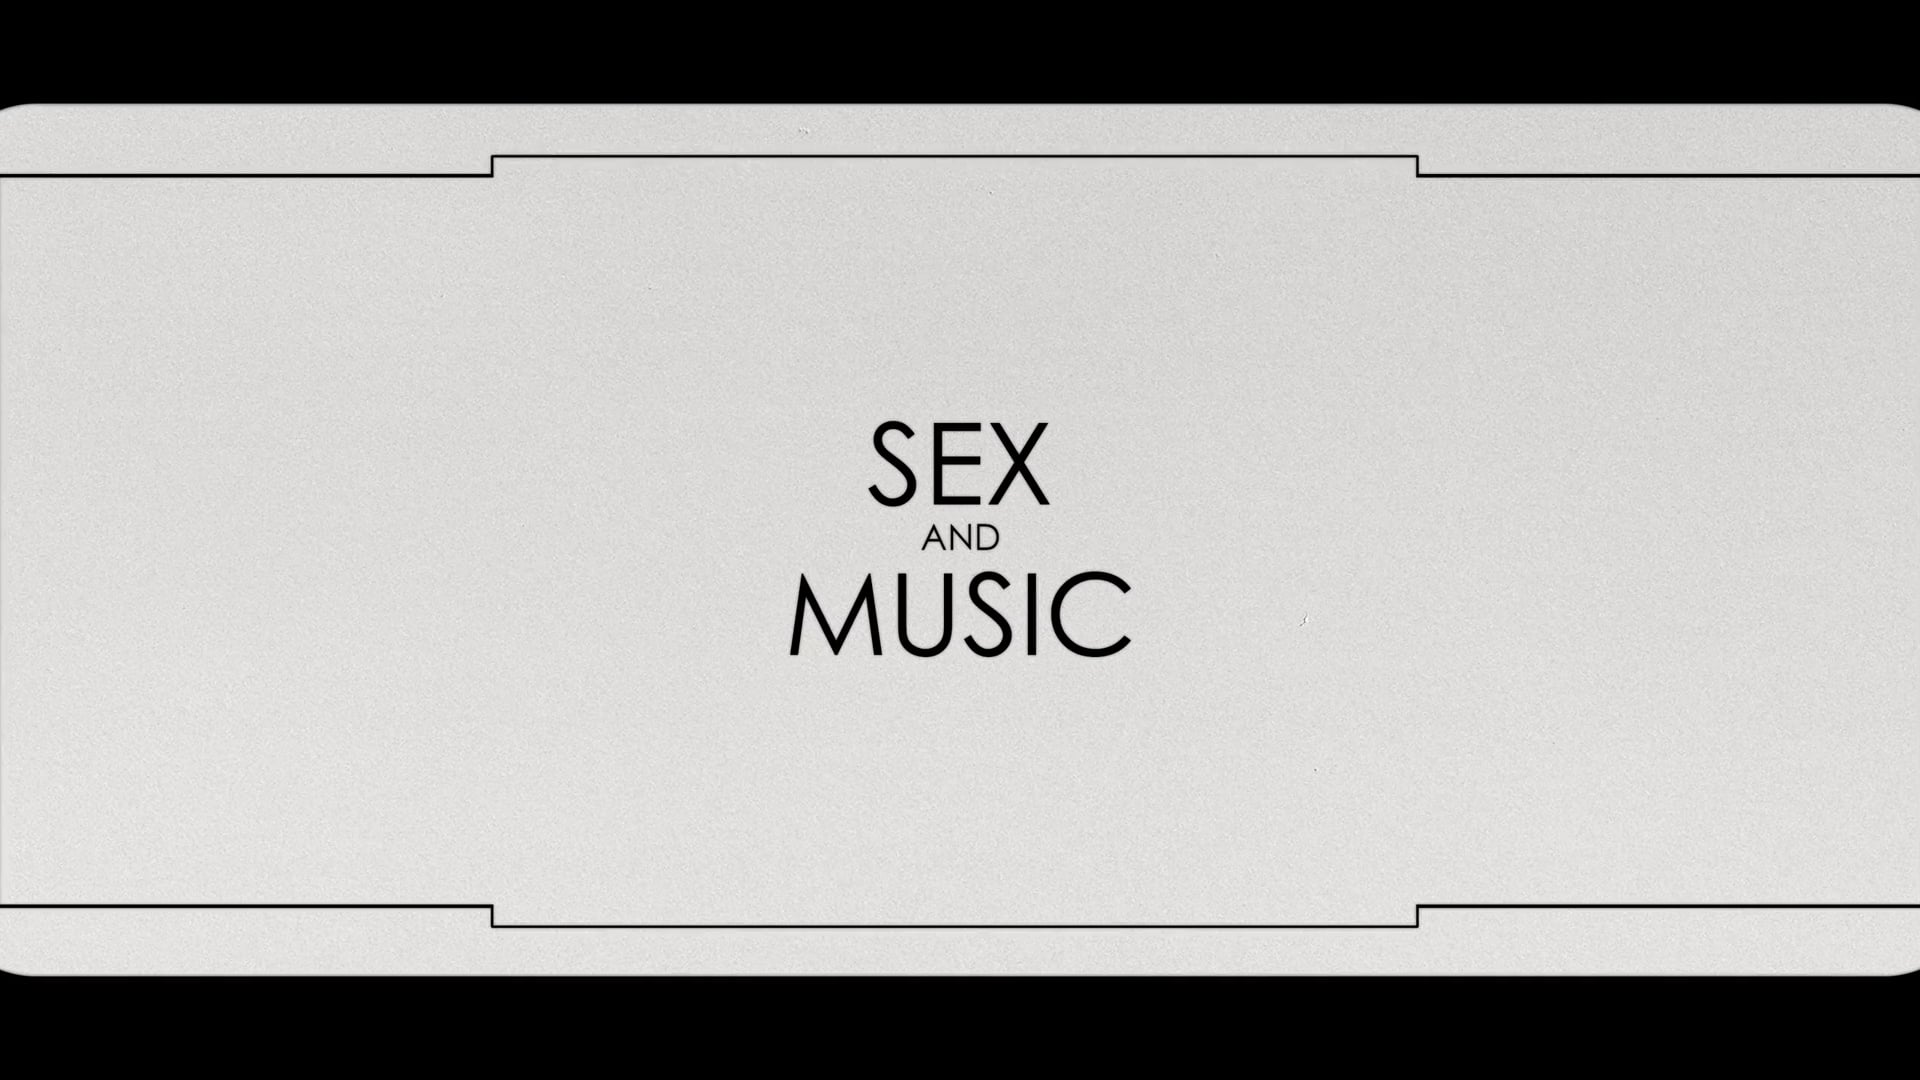 VICA - SEX AND MUSIC